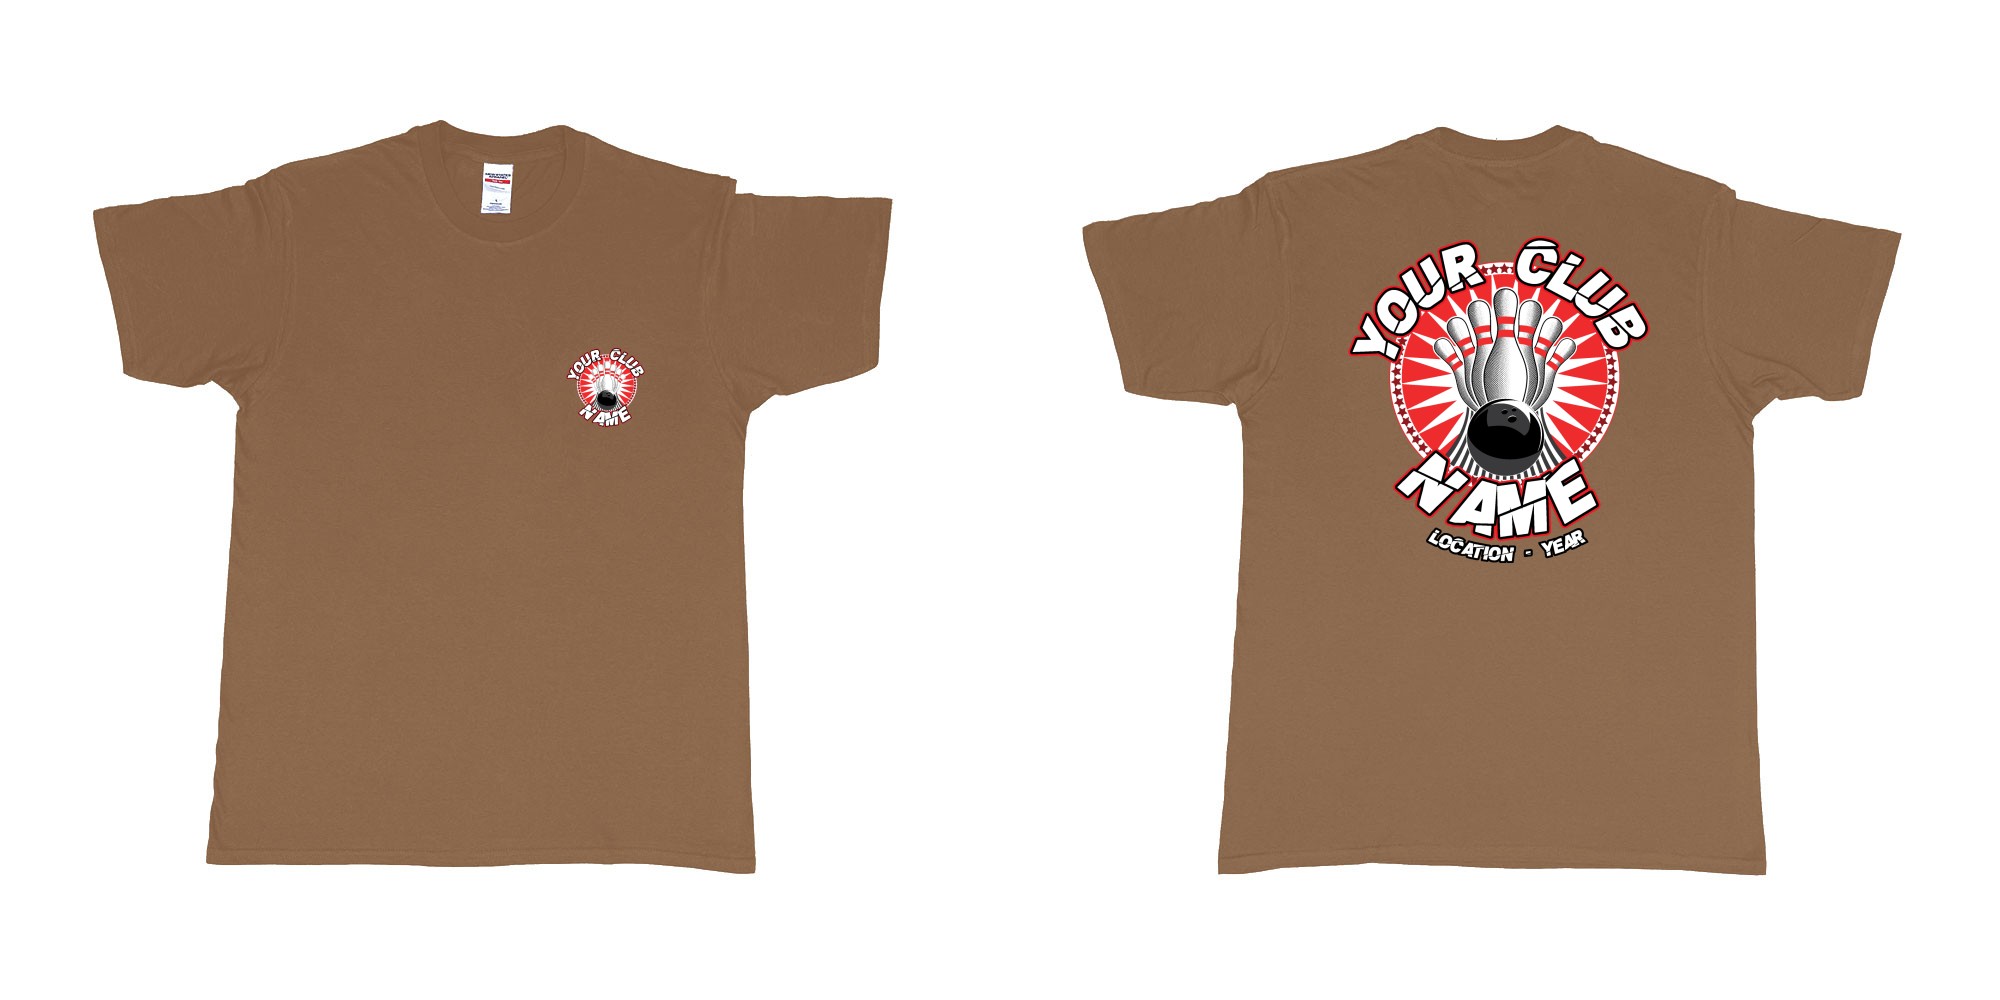 Custom tshirt design TPW strike bowling in fabric color chestnut choice your own text made in Bali by The Pirate Way